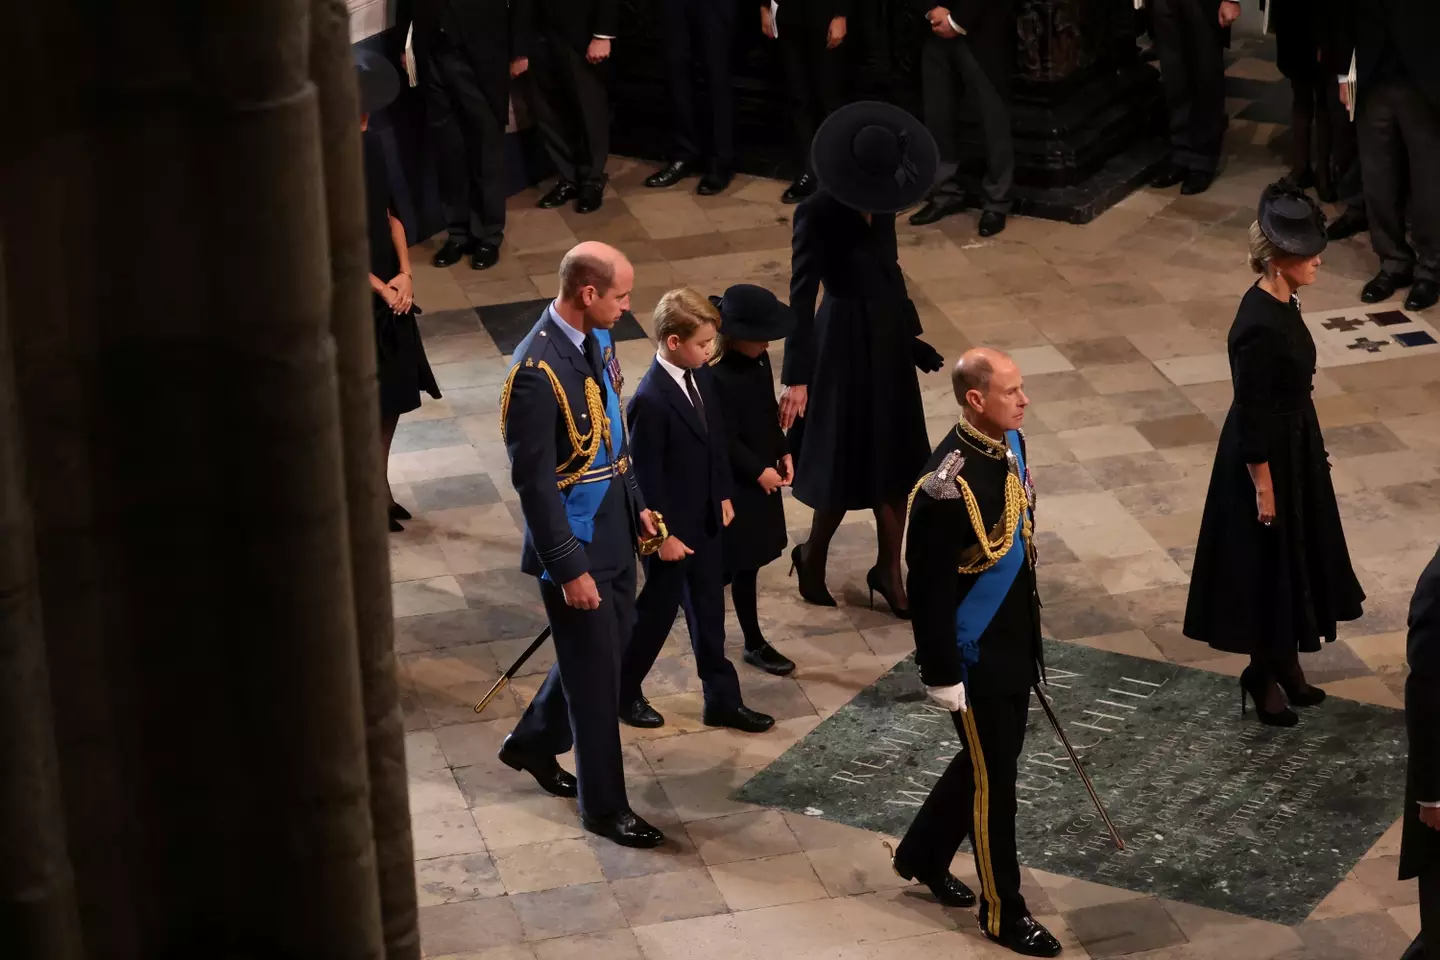 Prince George and Princess Charlotte arriving at the Queen's funeral with their parents.